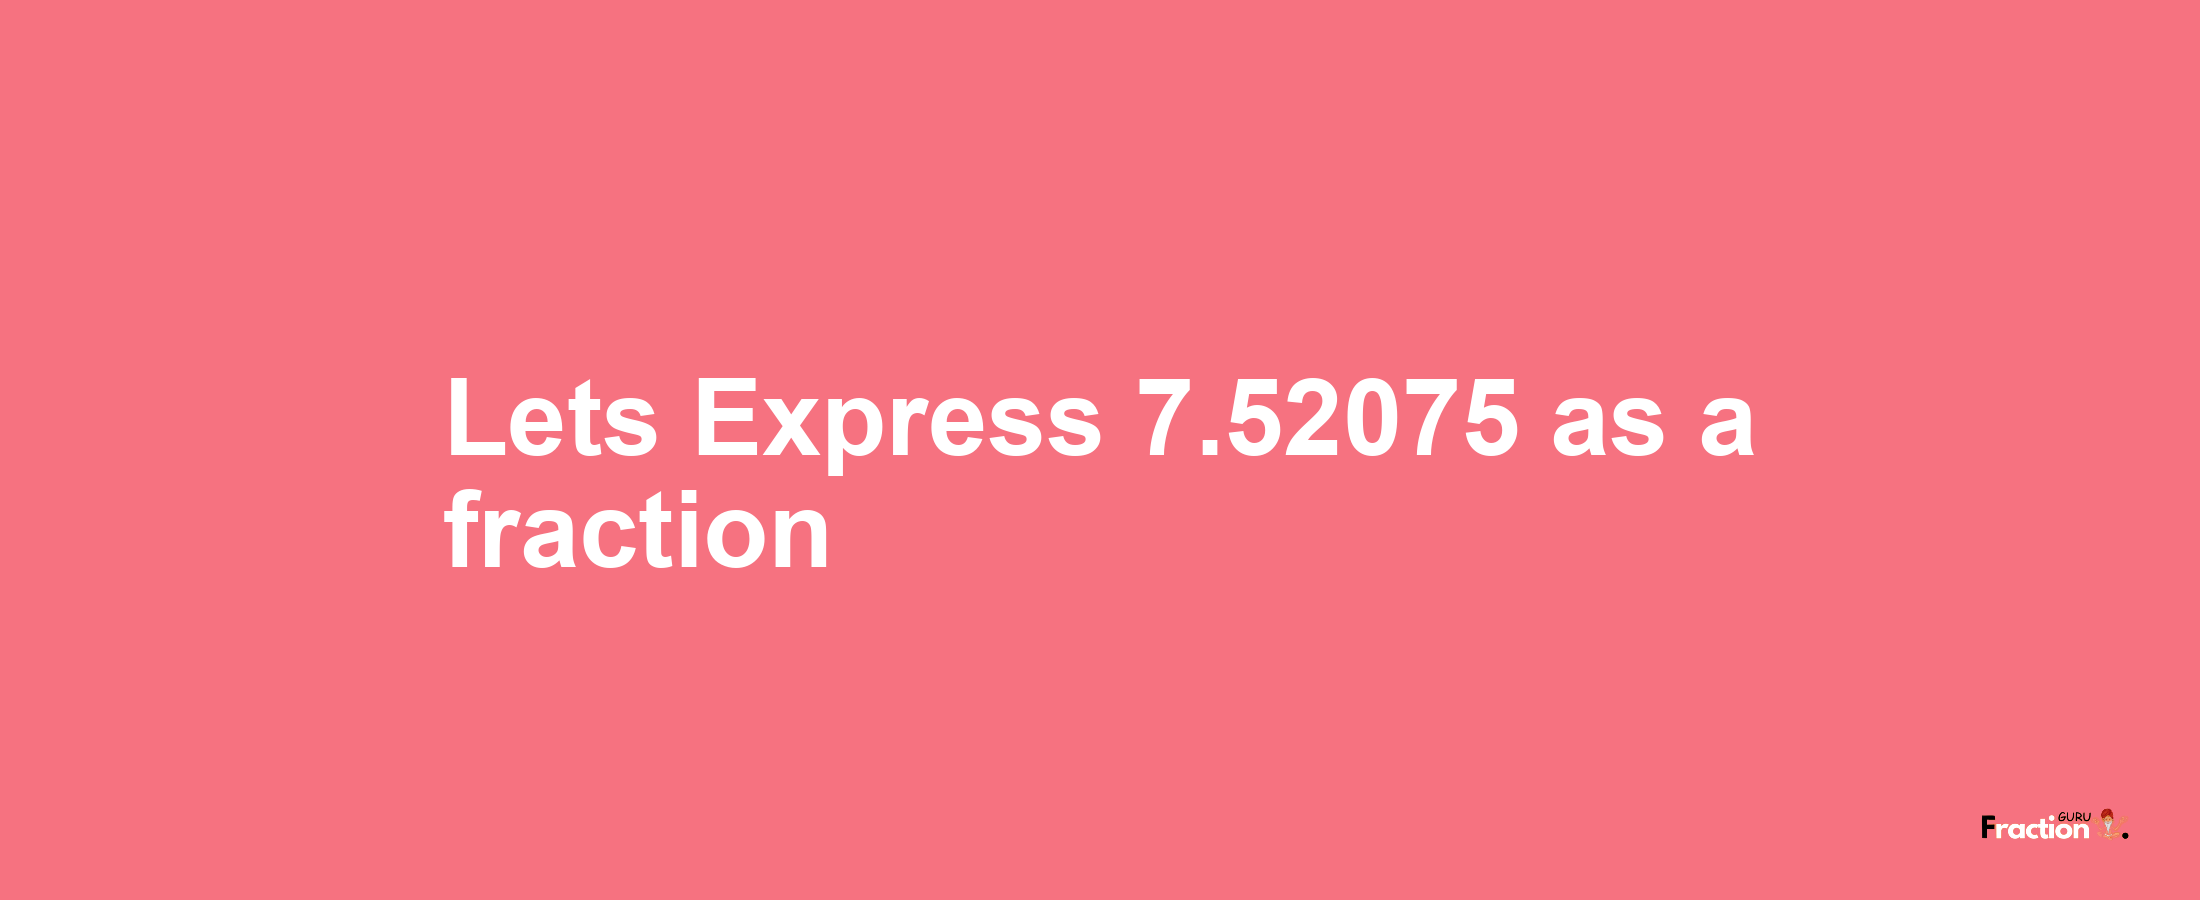 Lets Express 7.52075 as afraction